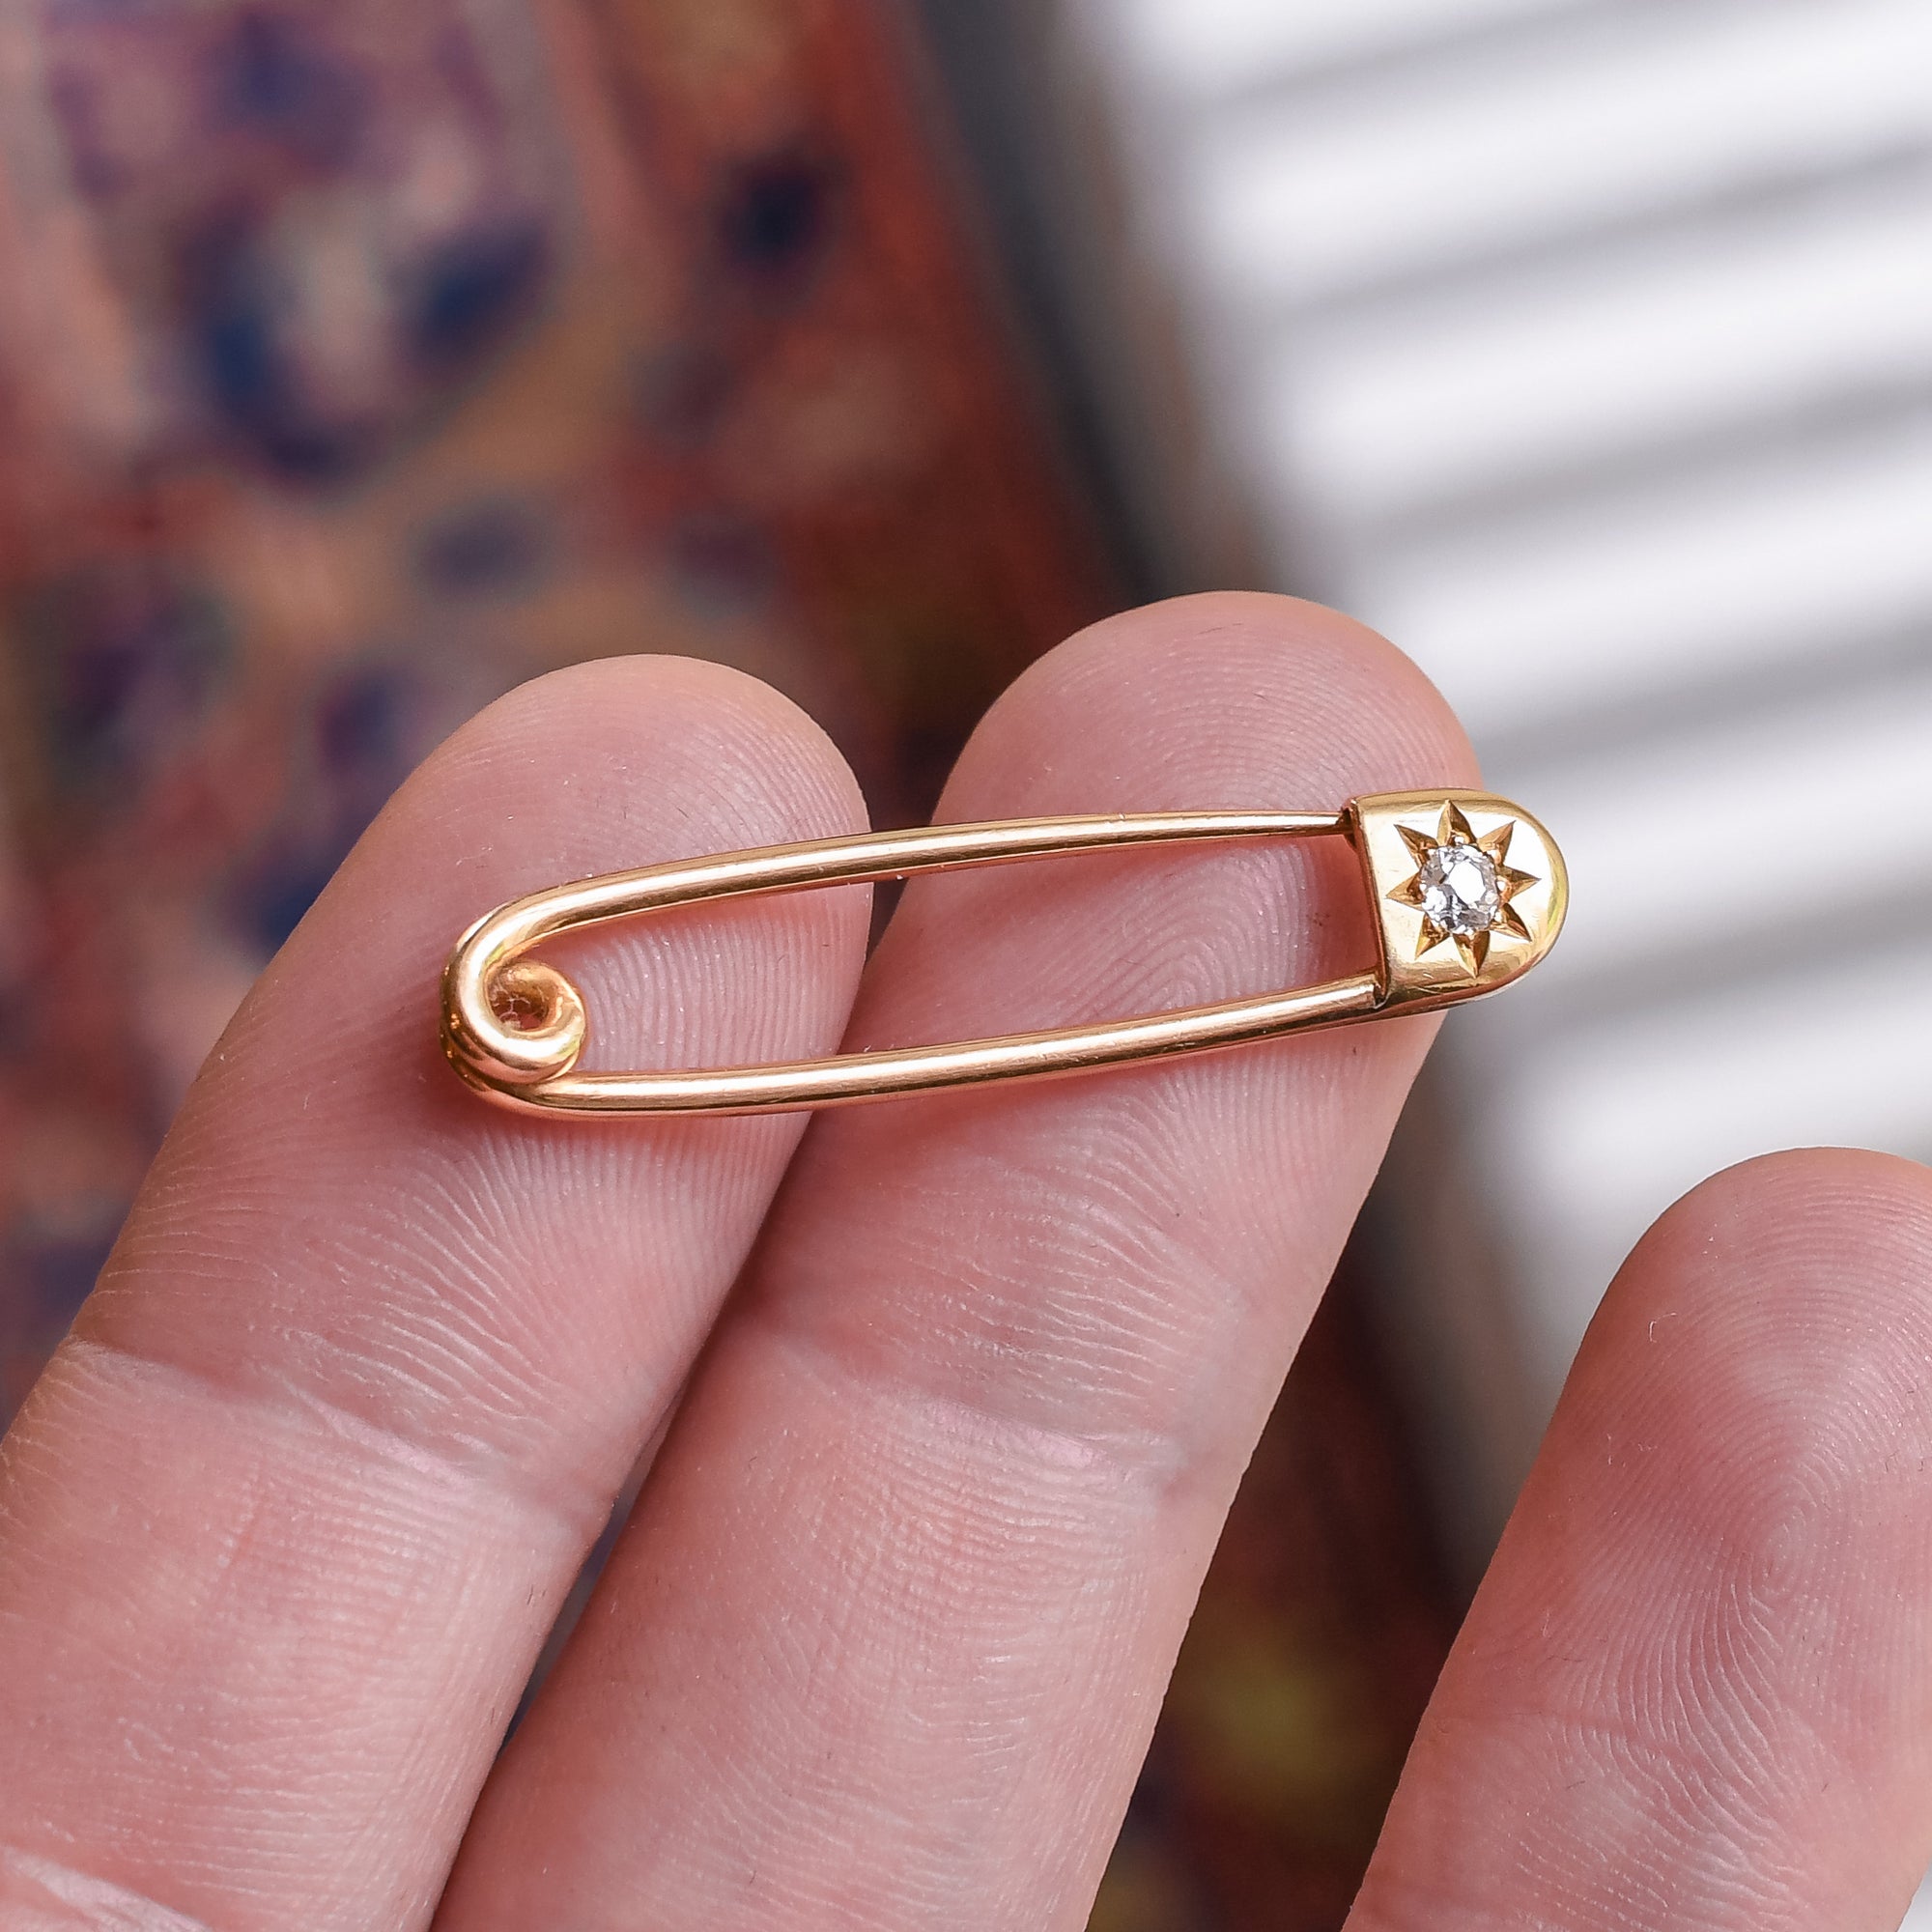 Safety Pin Earrings, Celebrity Inspired Safety Pin Earrings, Gold